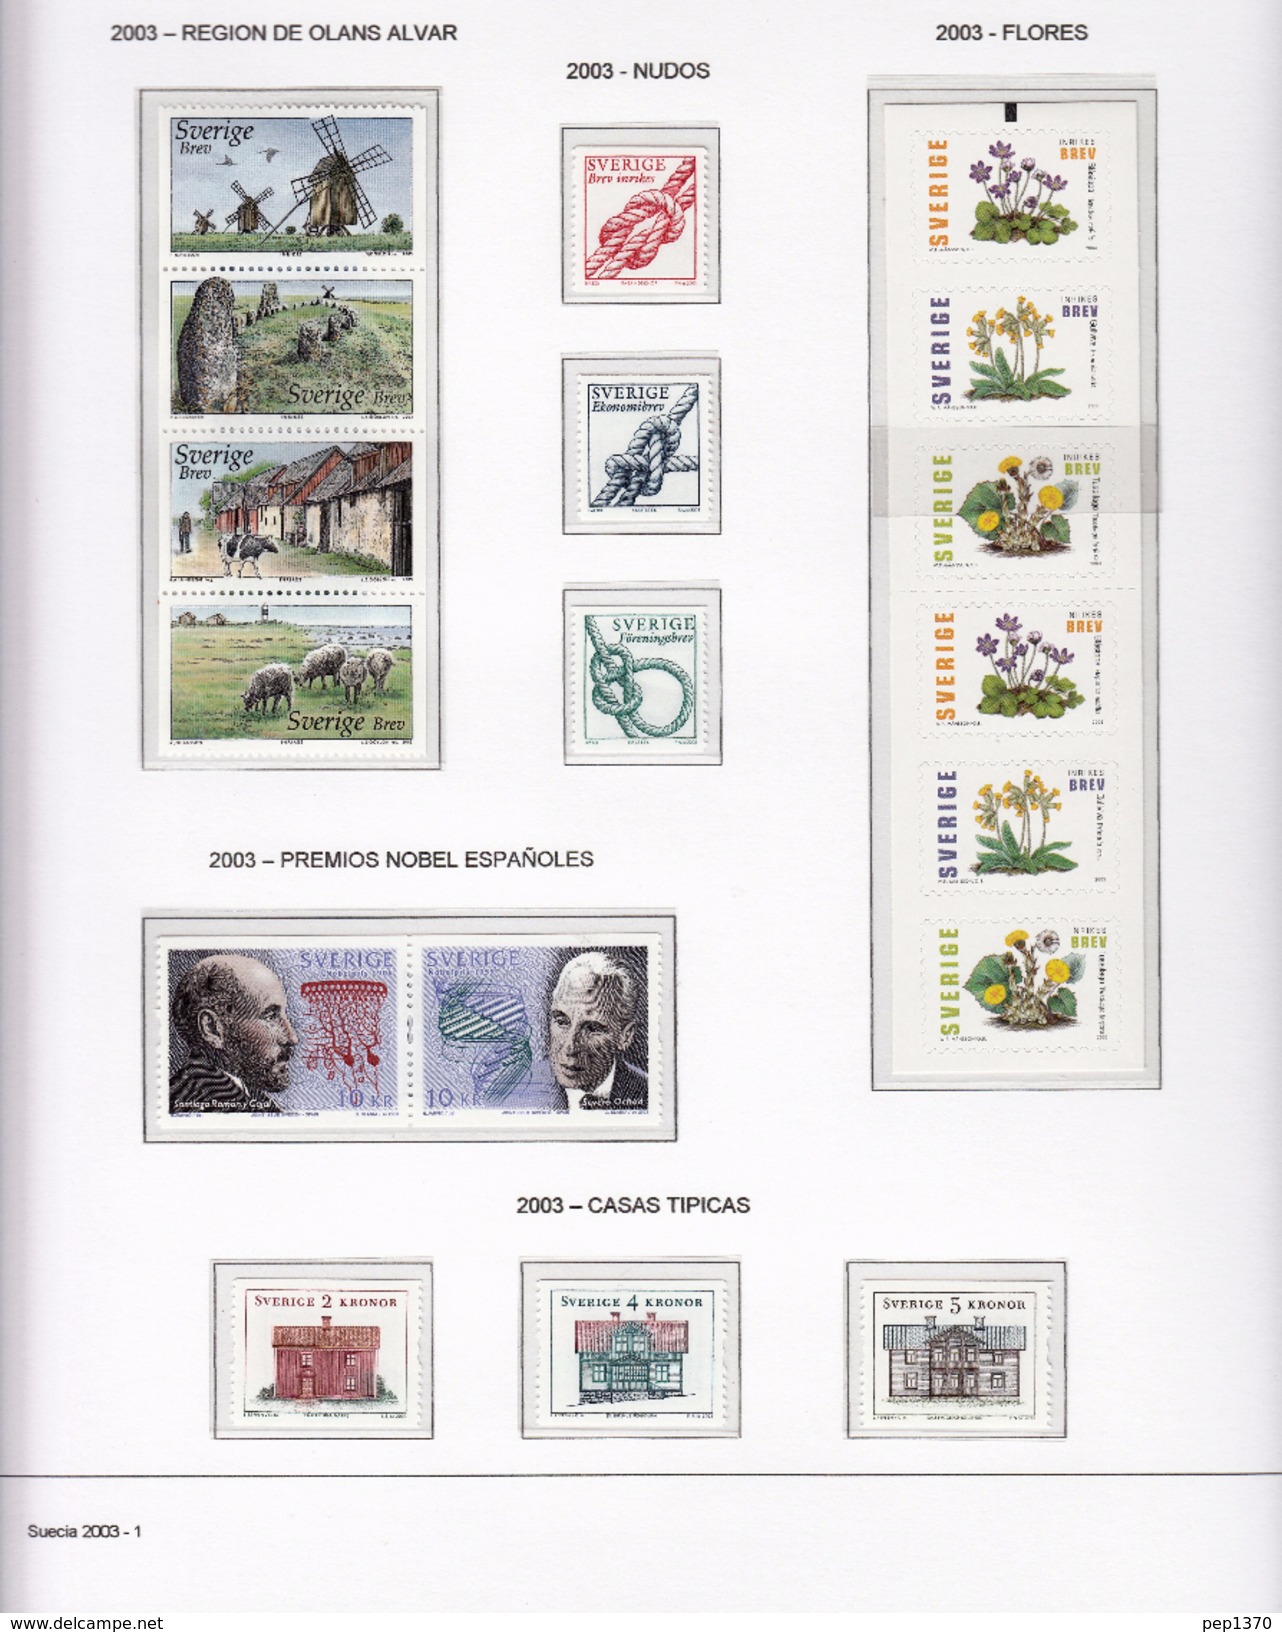 SUECIA 2003 - SWEDEN -  COMPLETE YEAR 2003 - IN ALBUM (SEE ALL THE IMAGES) (CATALOGUE 173,75) - Annate Complete